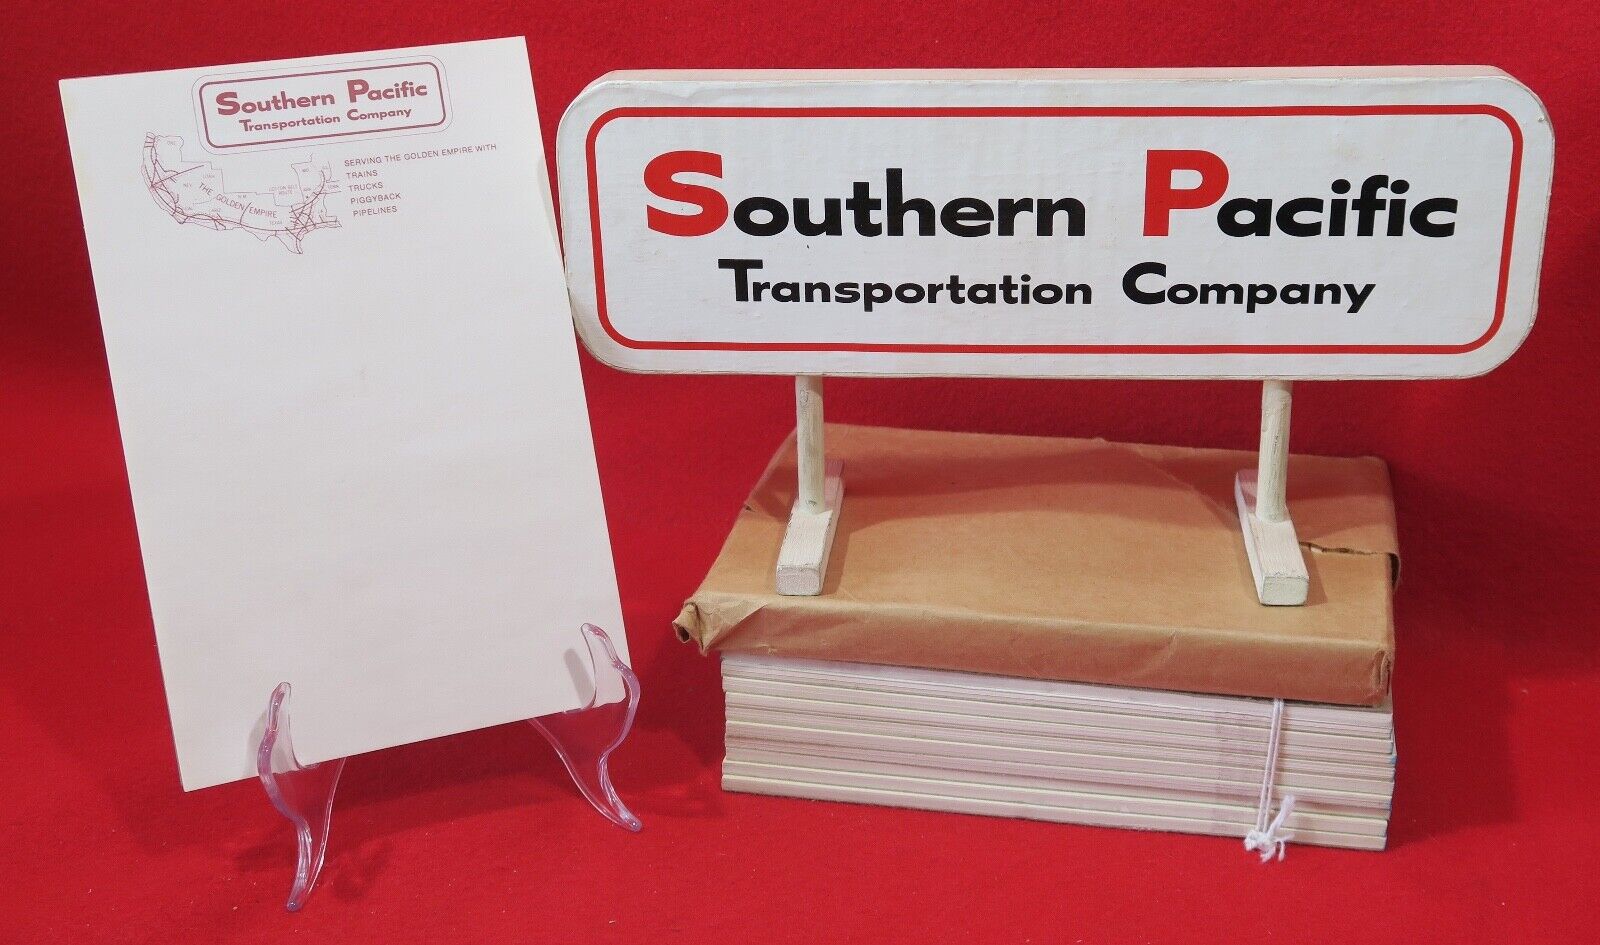 SOUTHERN PACIFIC TRANSPORTATION COMPANY DESK SIGN & NOTEPAD PACKAGE OF 14 PADS